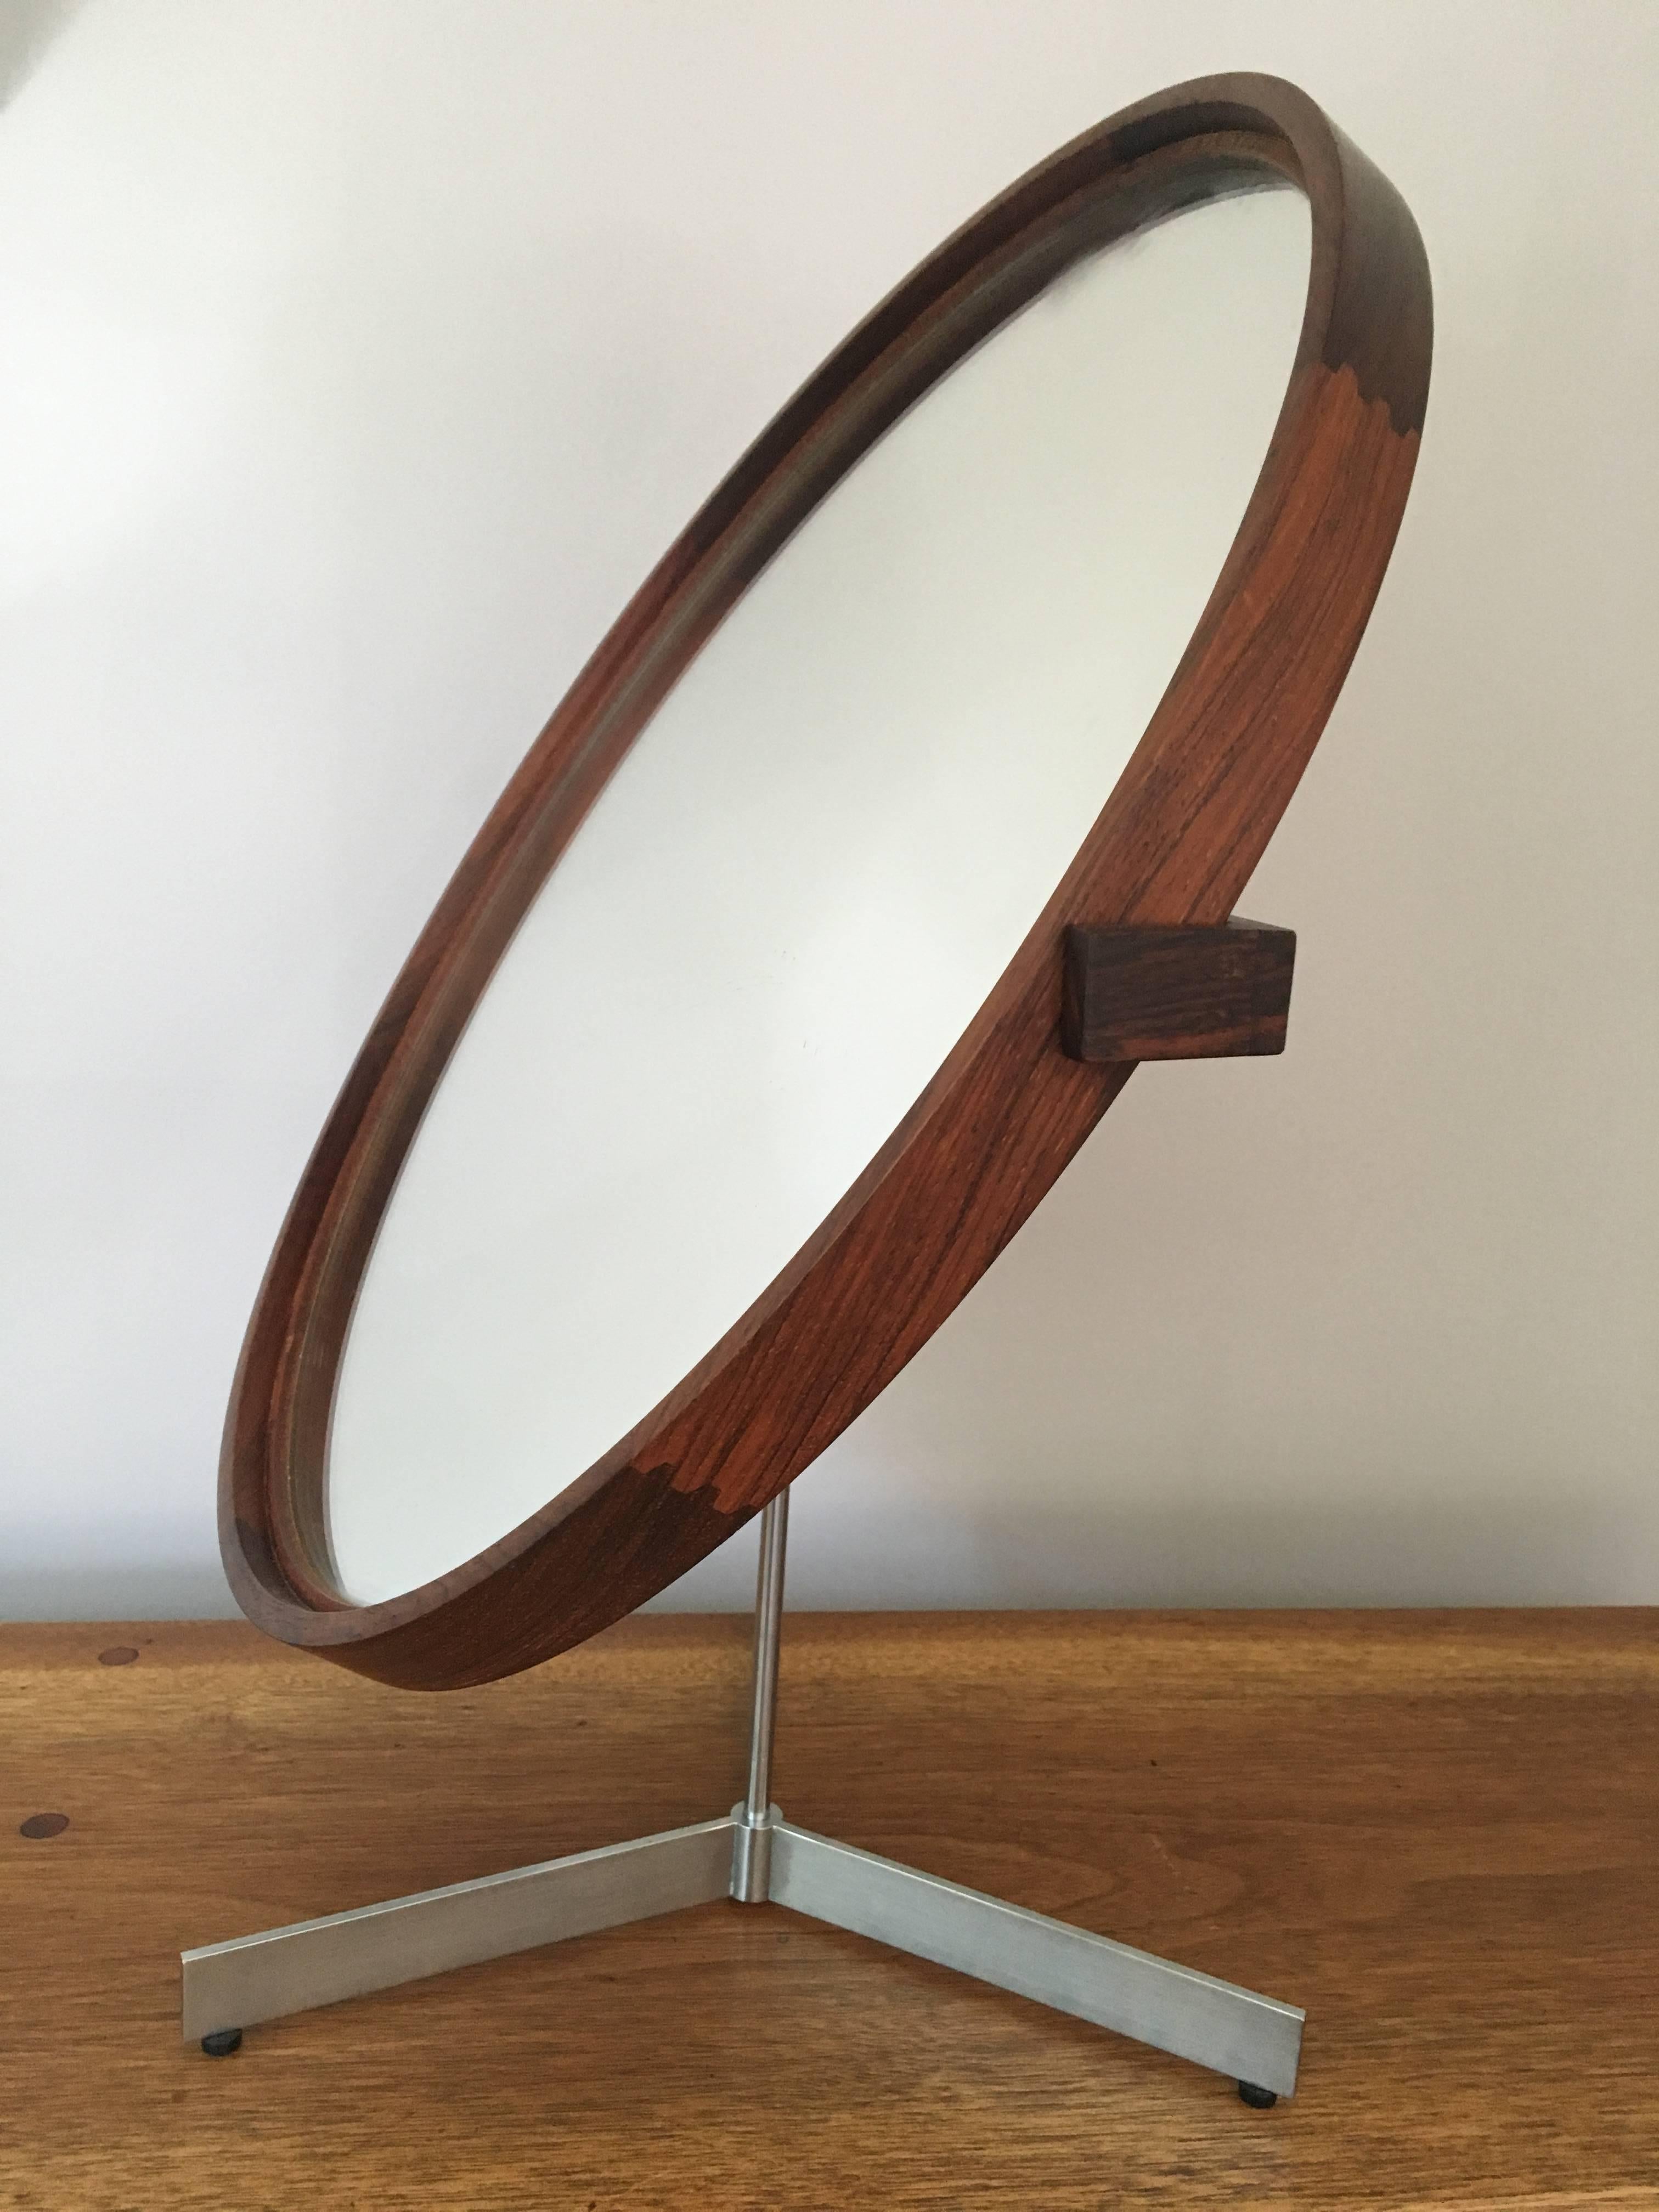 Rosewood table mirror designed by Otto and Uno Kristiansson in 1958, executed circa 1965 by Luxus Vittsjo, Sweden. Exceptional rosewood grain.